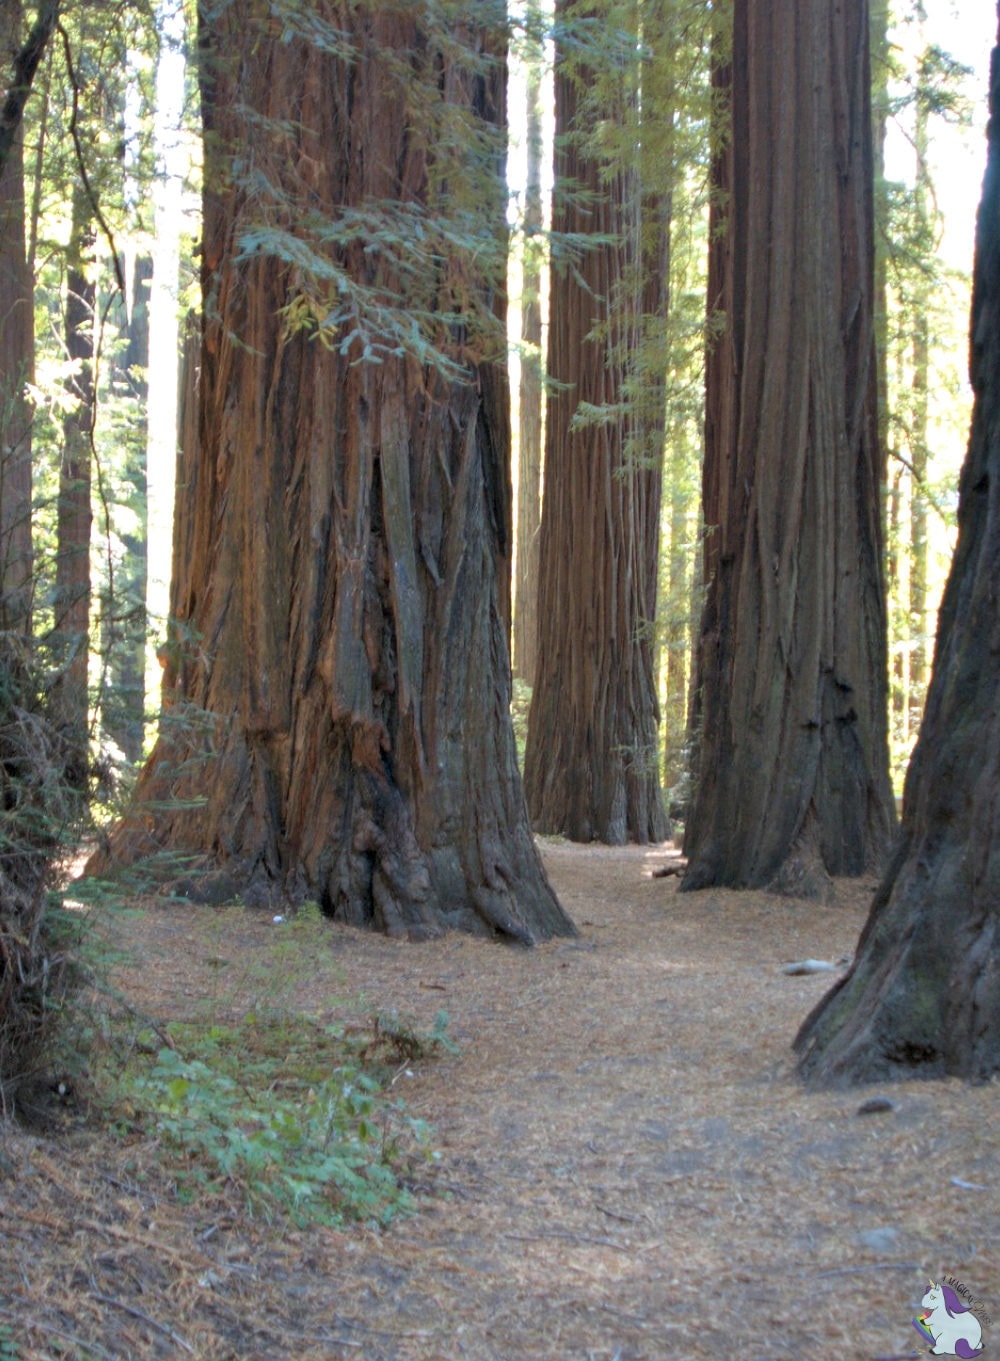 5 Magical Bucket List Ideas in the US - Redwood forest